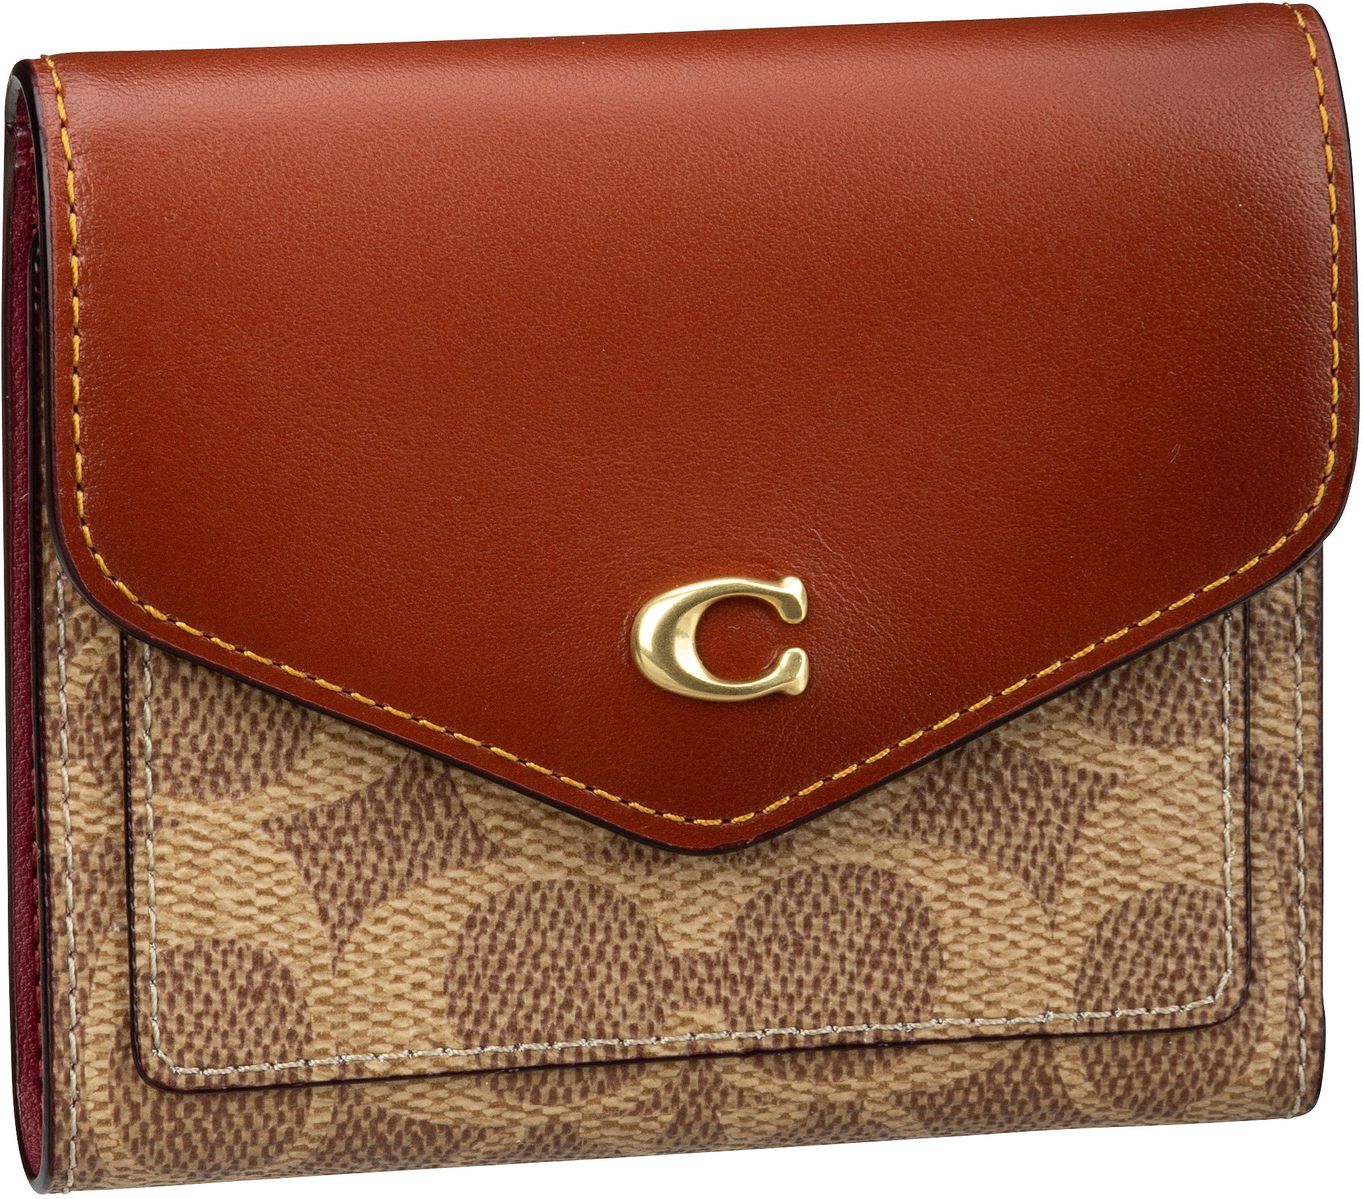 COACH Wyn Small Wallet Colorblock Coated Canvas Signature - Tan Rust